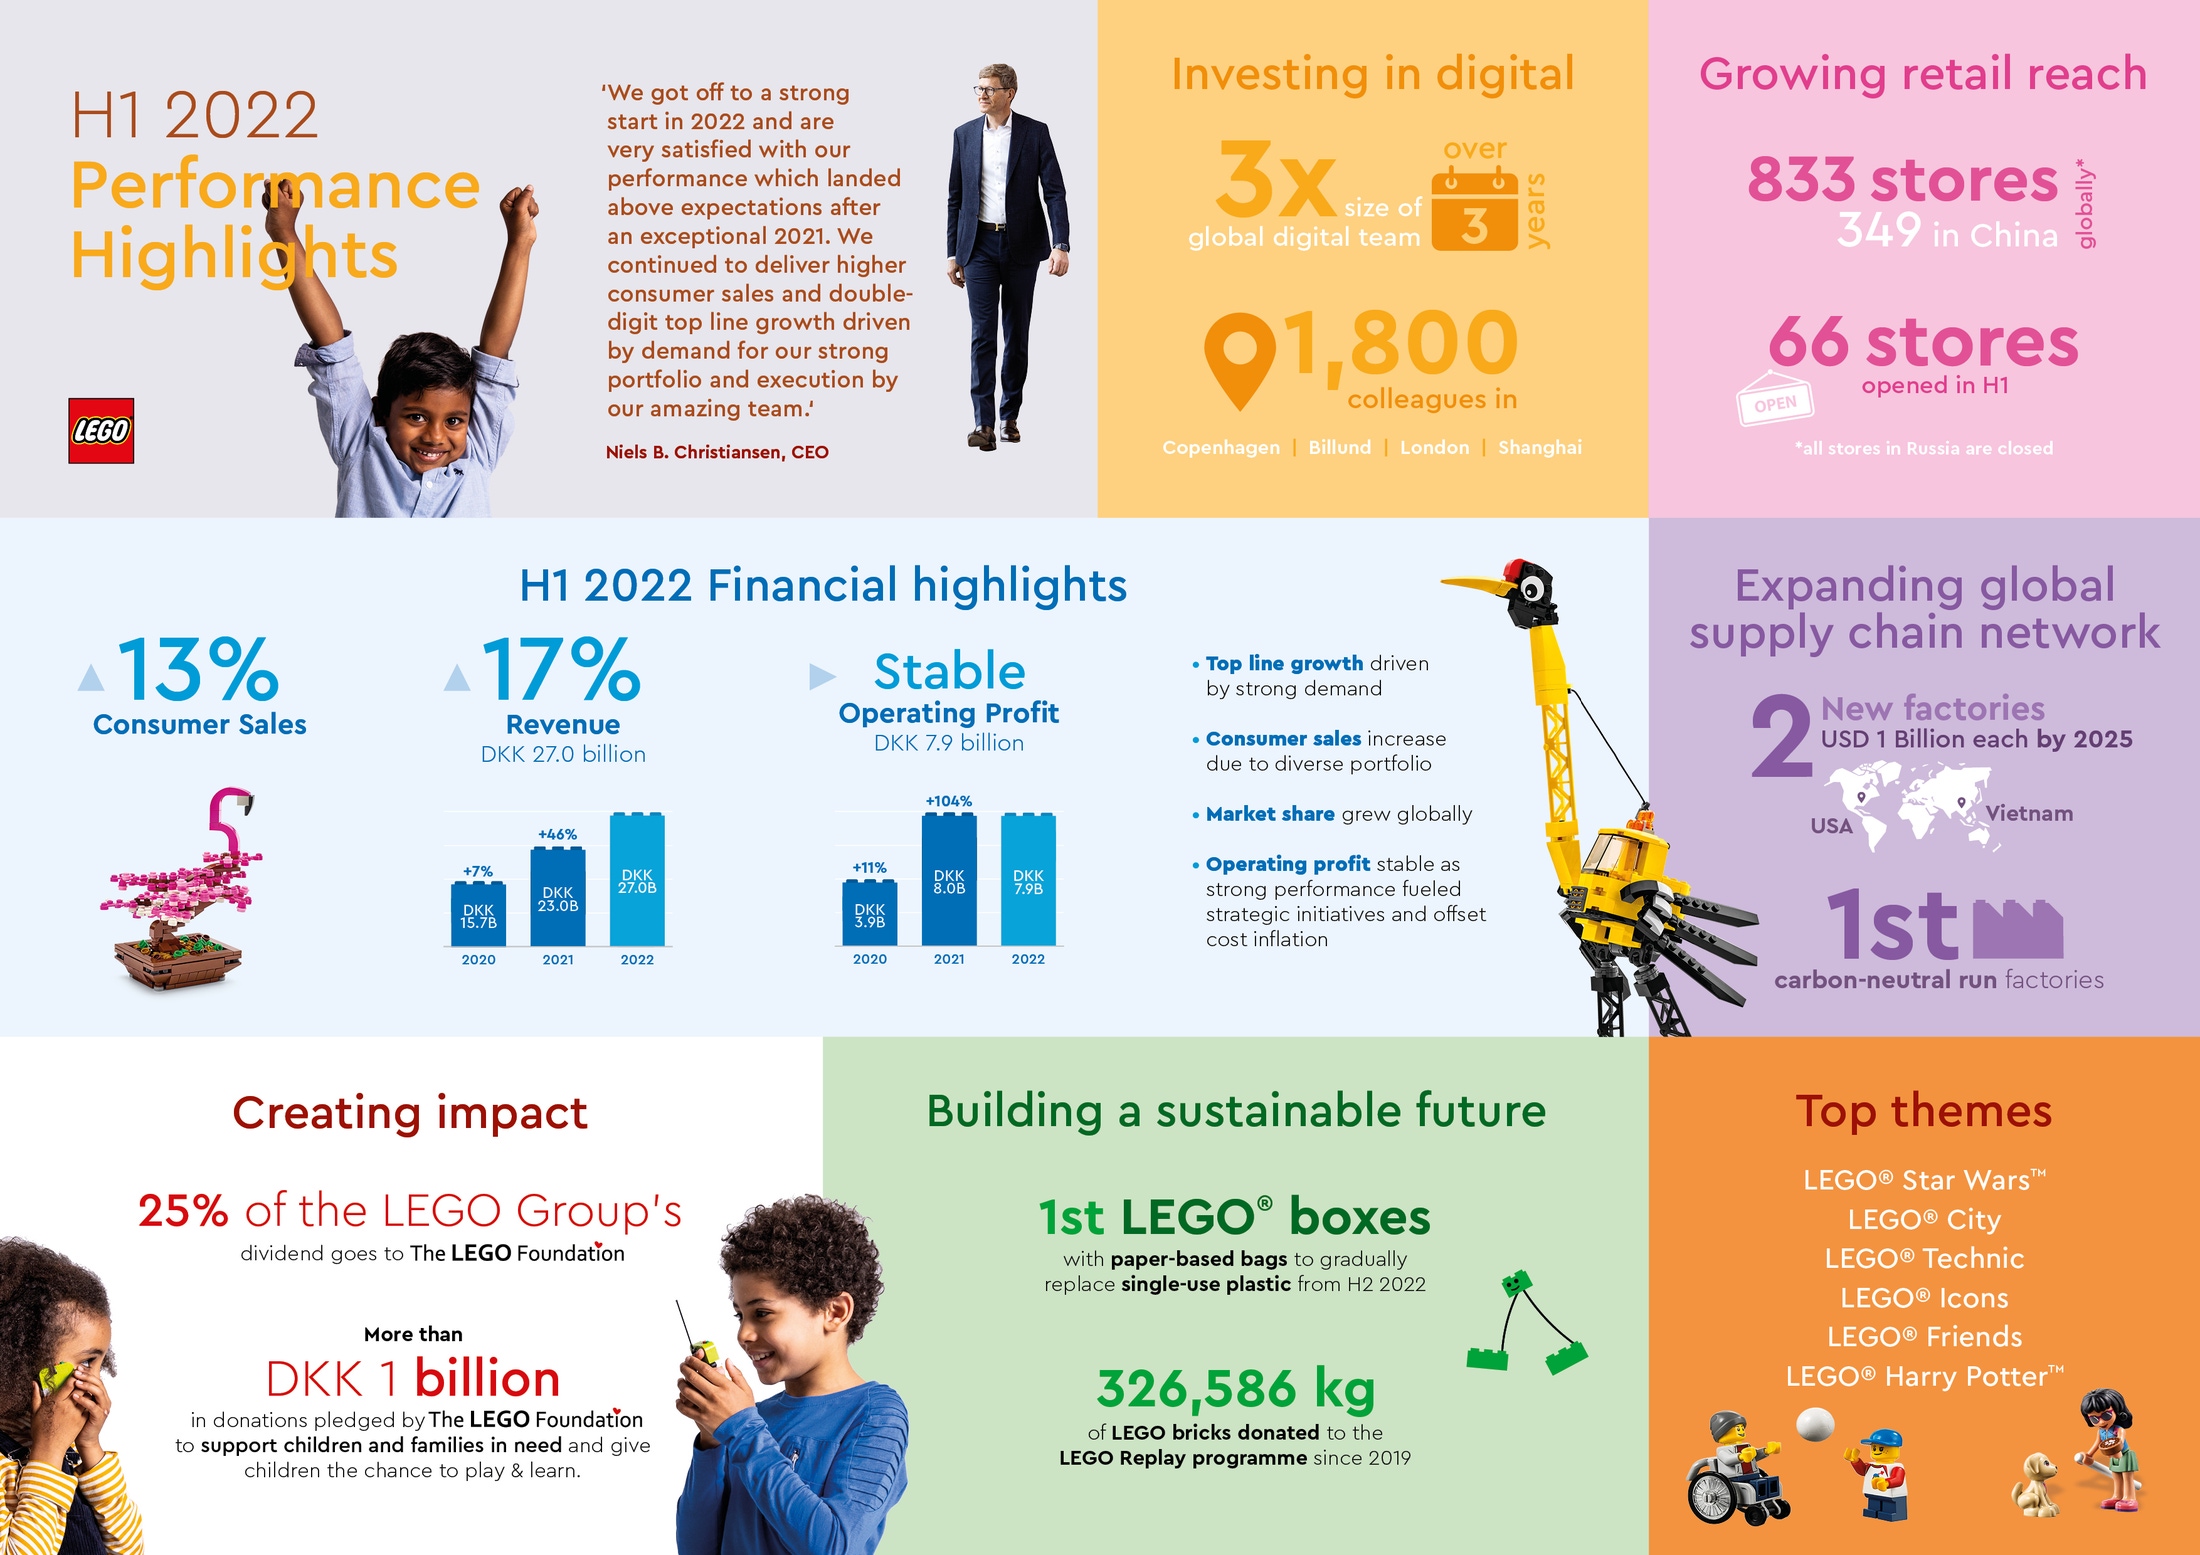 LEGO 1HY 2022 Results Reports Strong Continued Growth - Brick Fan